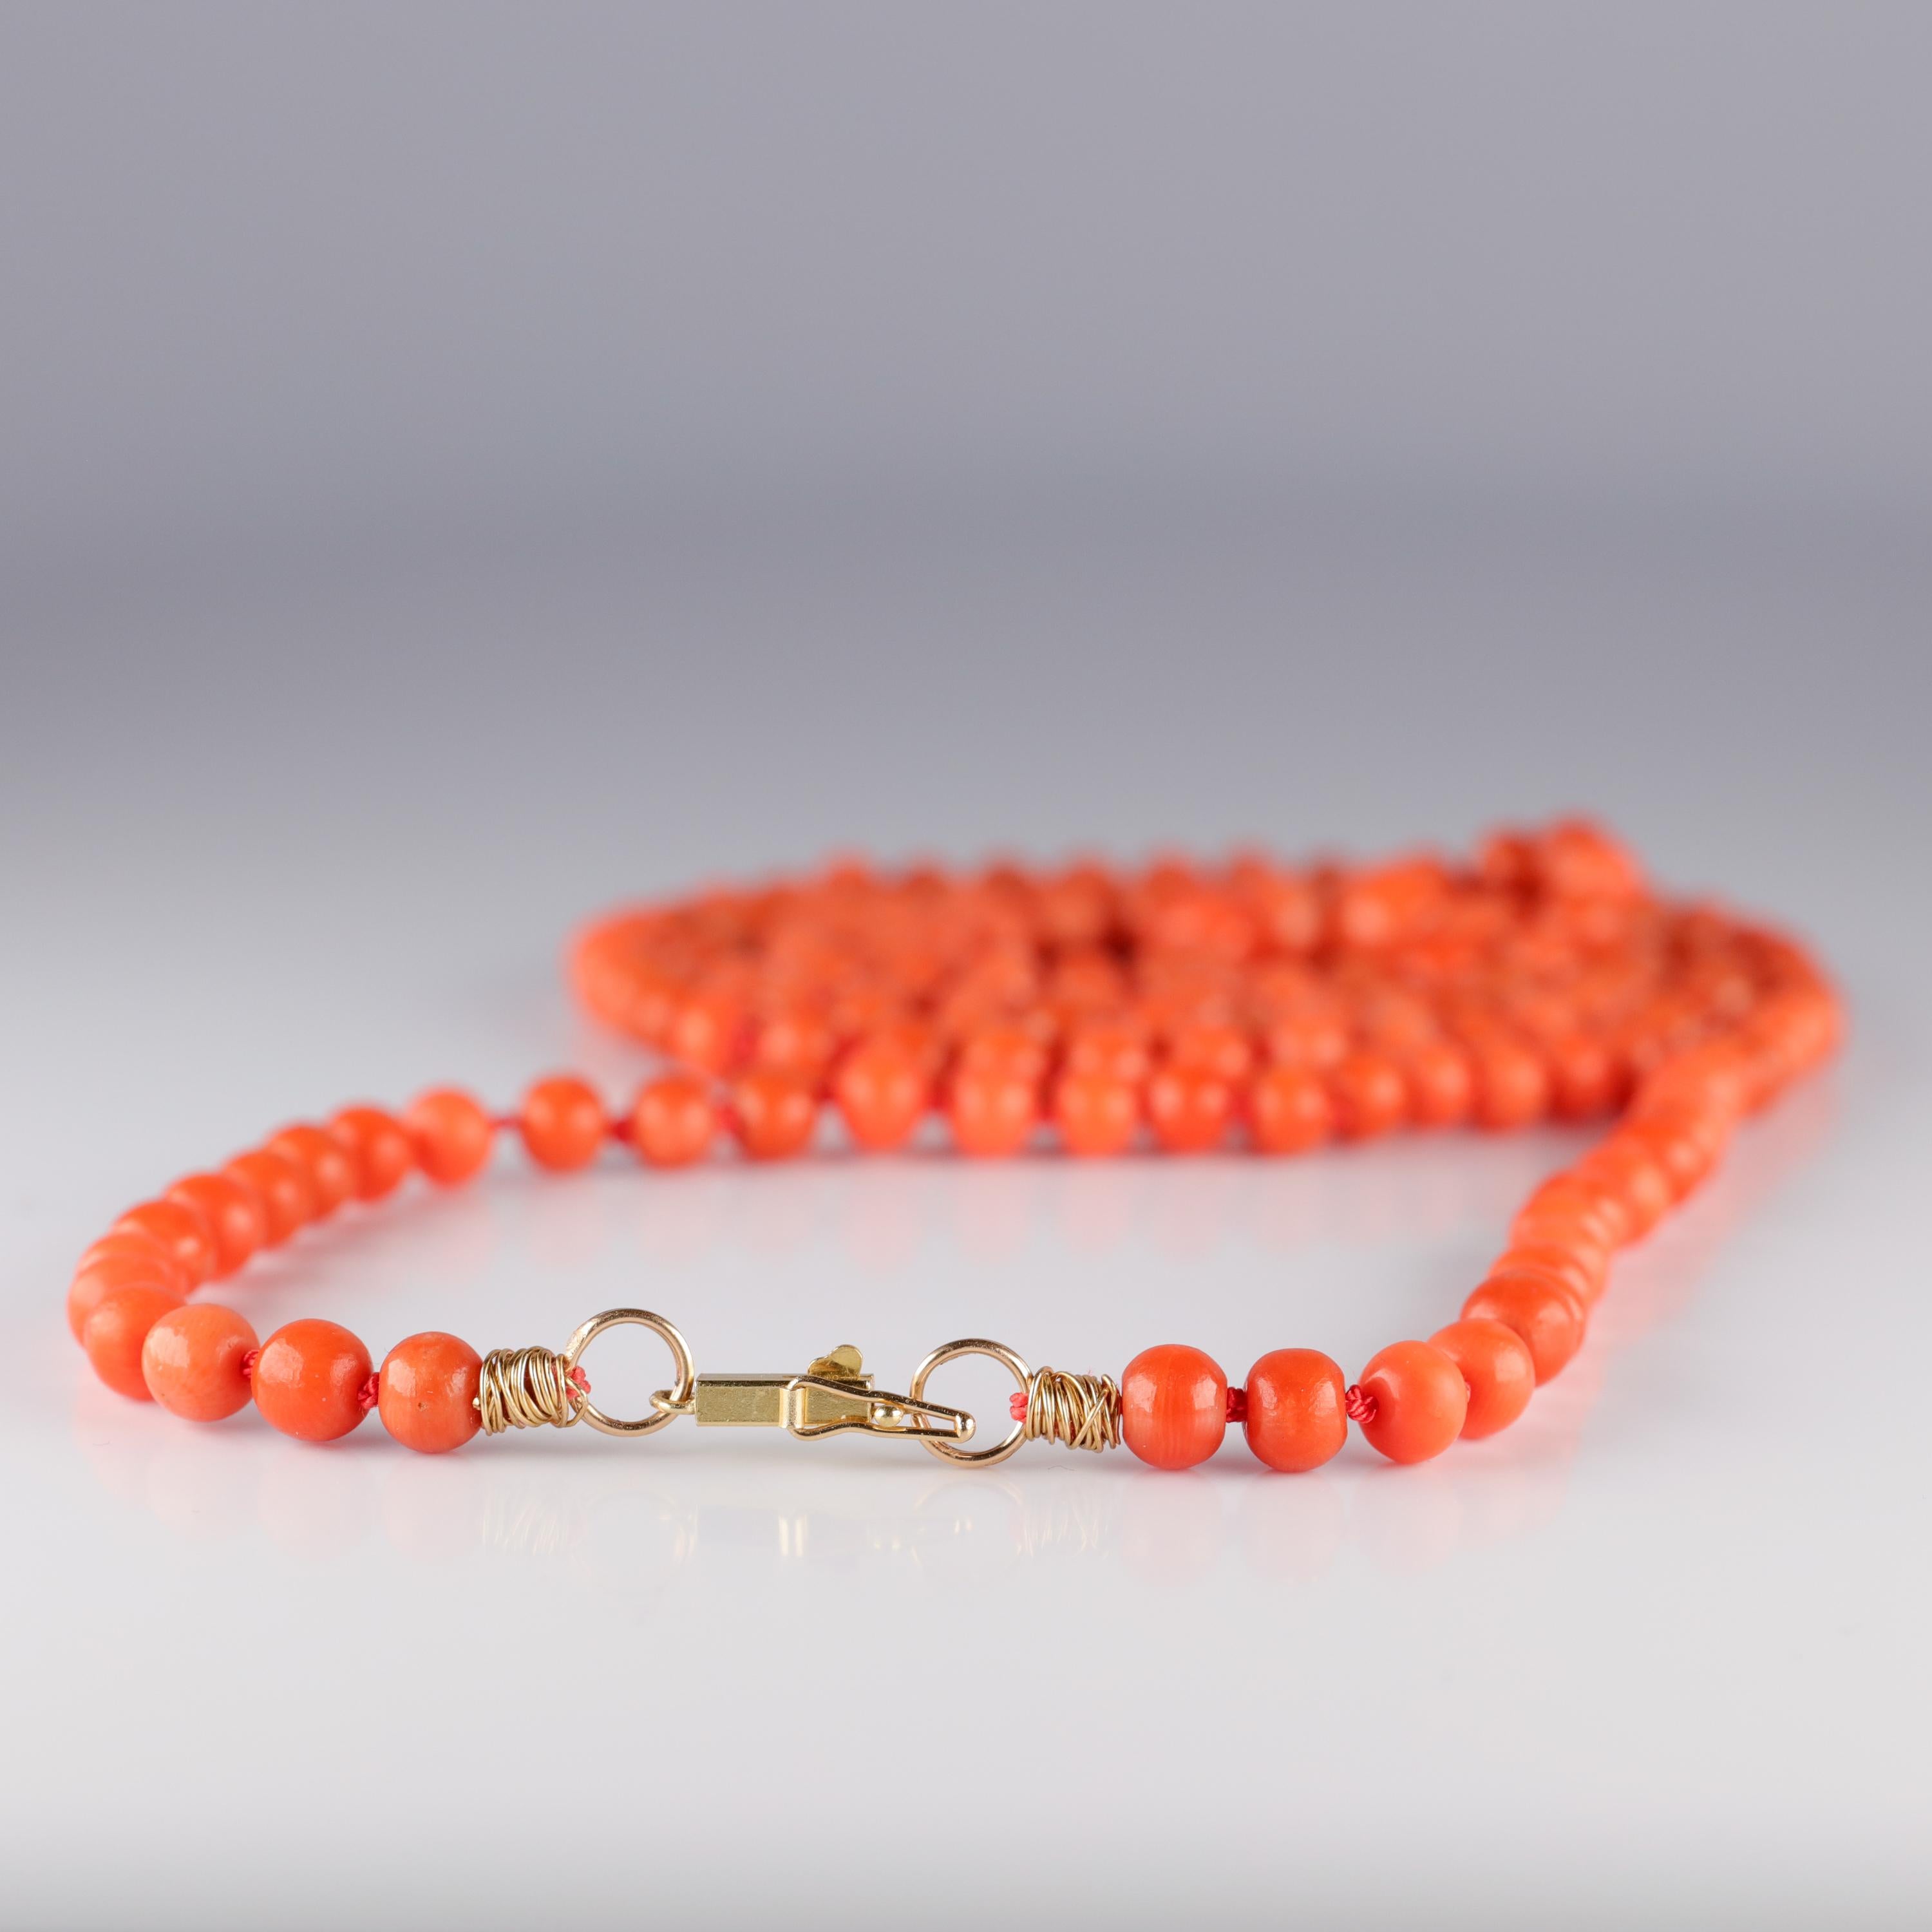 Three feet of natural, tomato-red coral beads. I kind of feel like I don't really need to say anything more. Except maybe this: it's actually 38 ½ inches, which is 2 ½ inches longer than three feet. So. Long. And gorgeous.

This luxuriously long